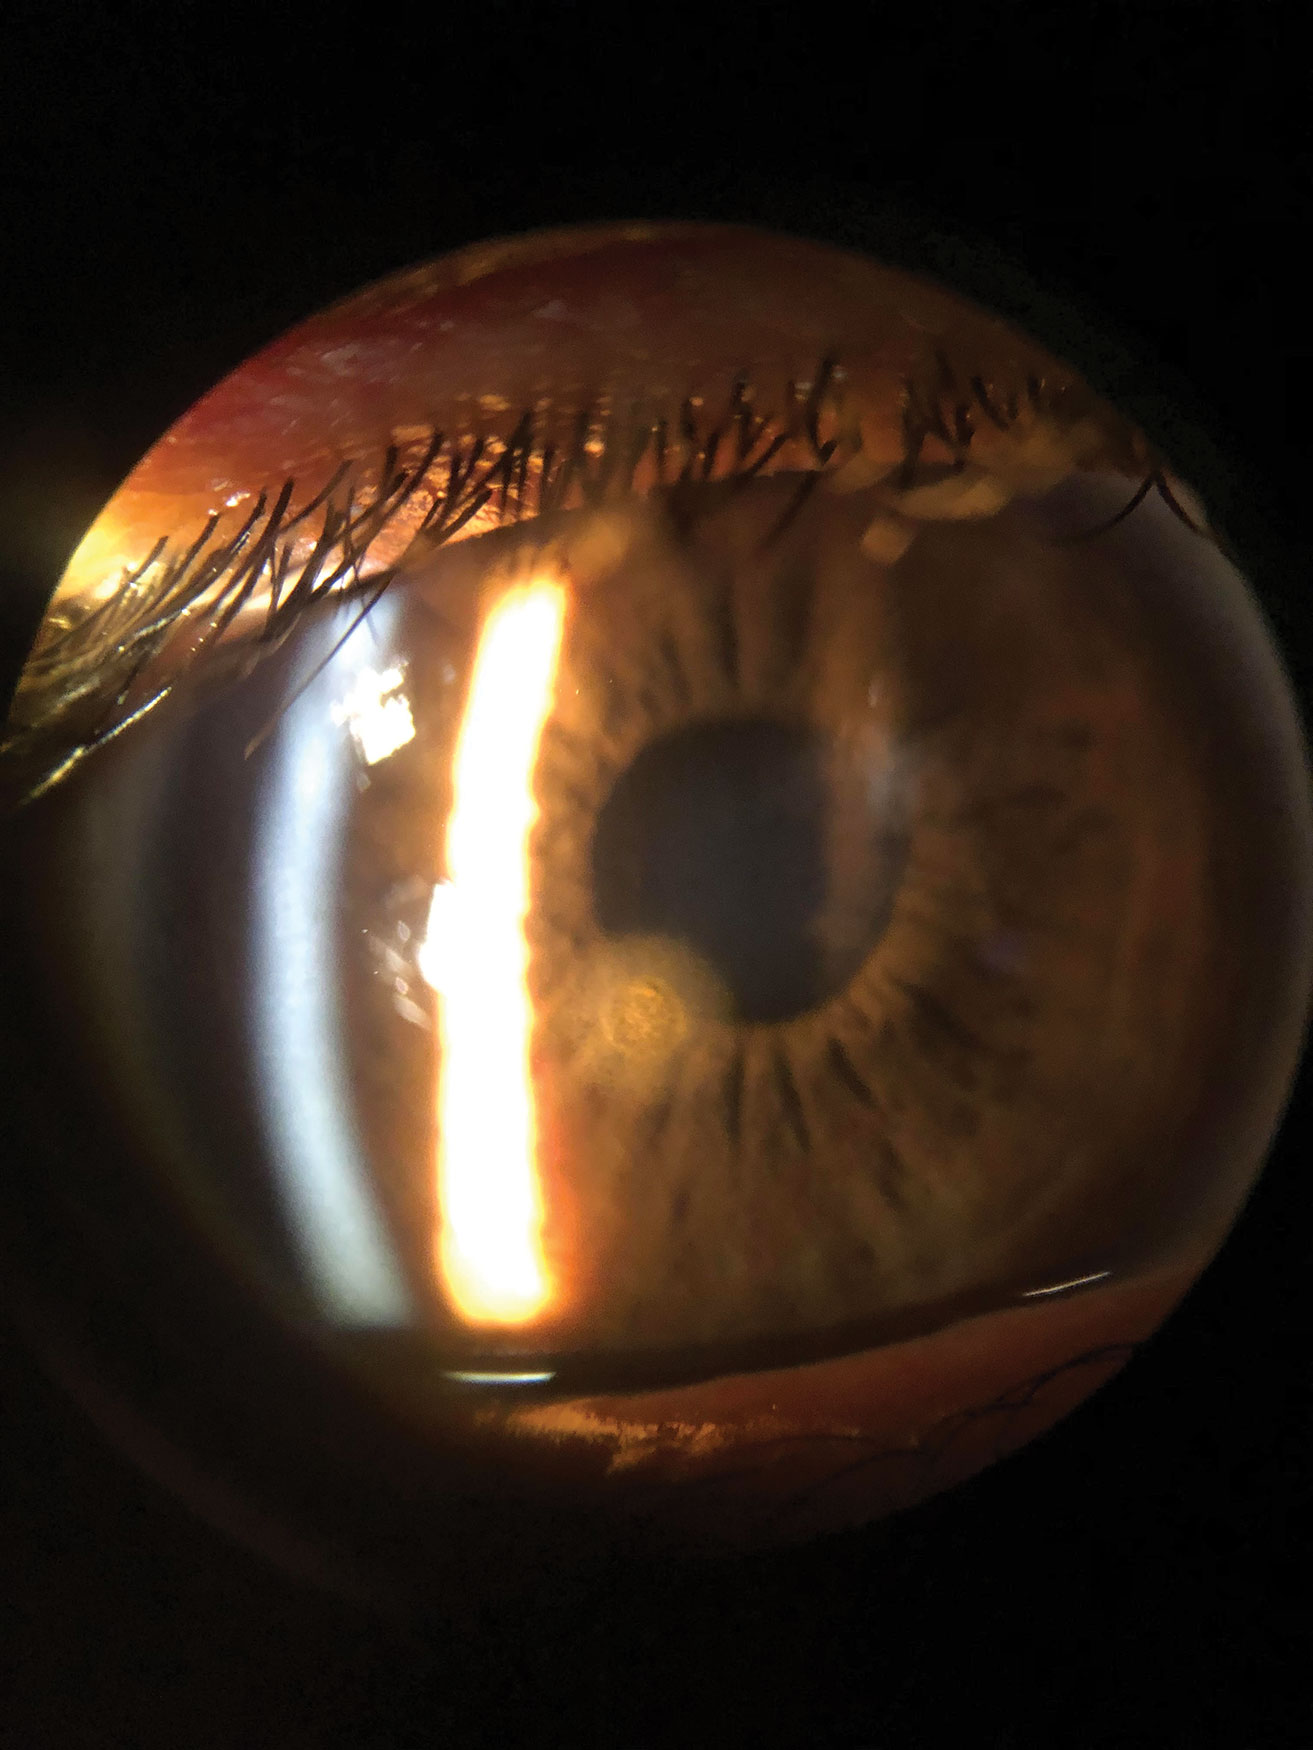 This is a patient’s cornea immediately after removal of a metallic foreign body but prior to rust ring removal. The object was superficial enough that it was removed with a sterile cotton swab after anesthetizing the patient’s eye.